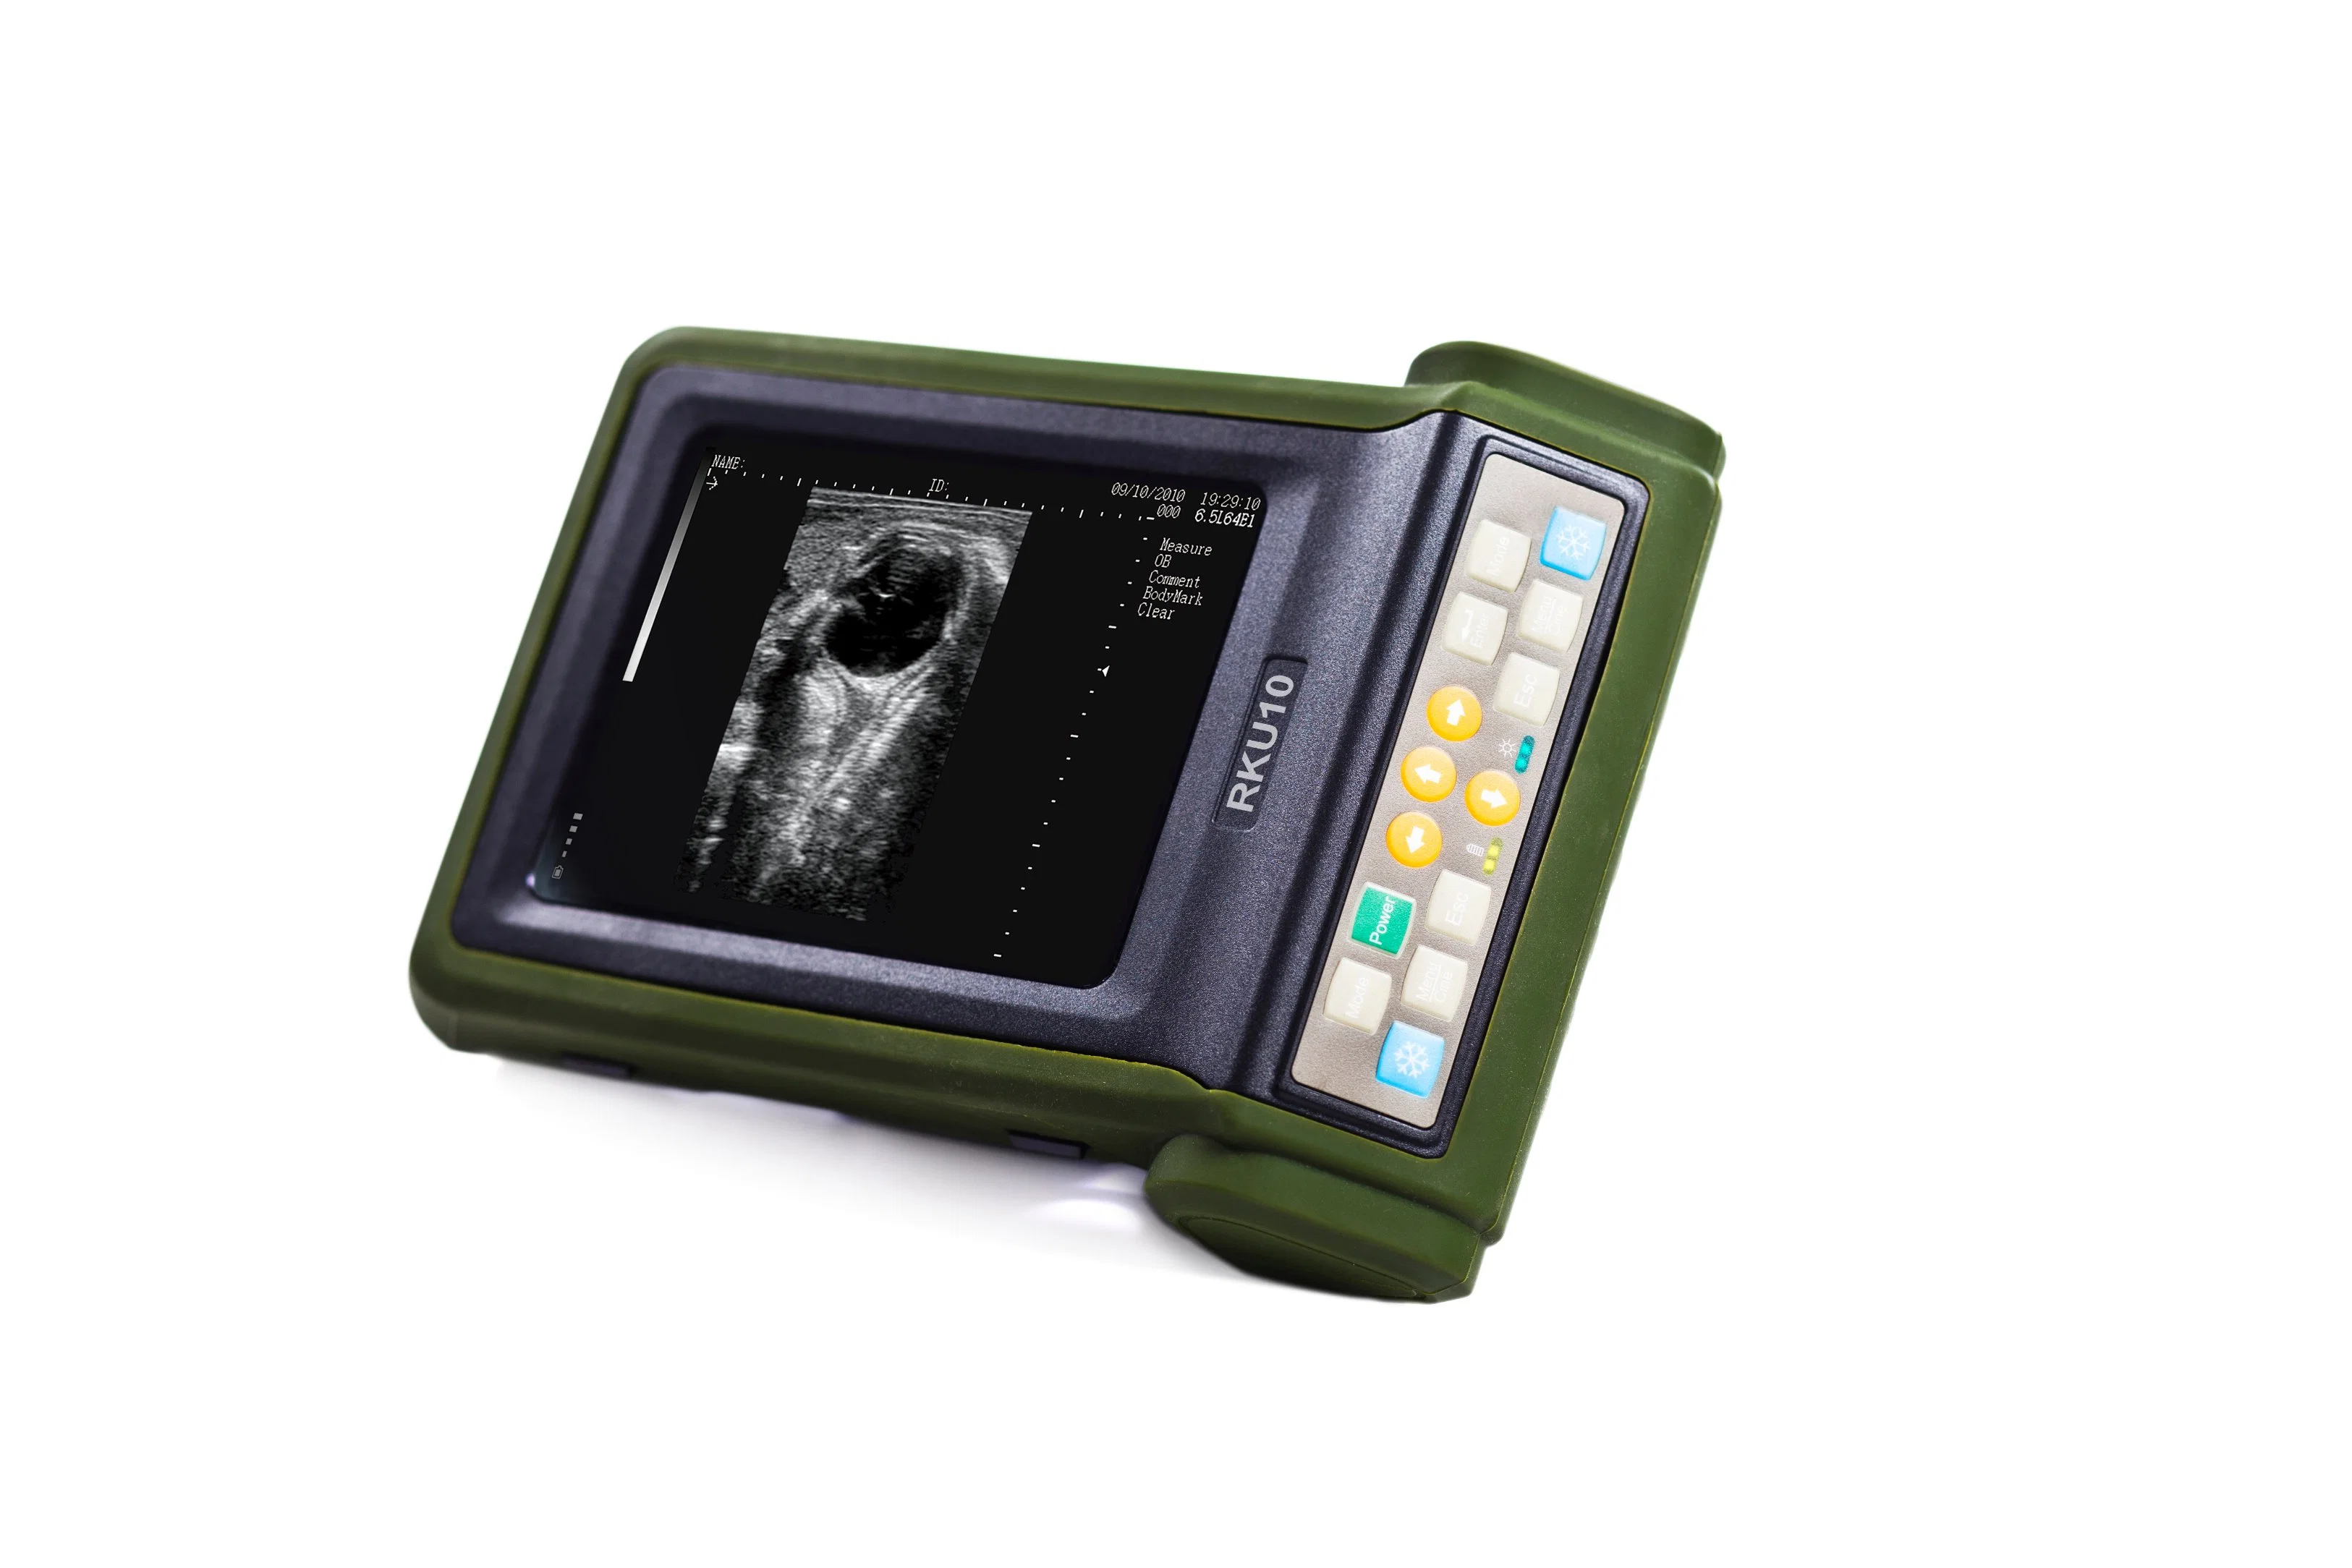 Veterinary Portable Handheld Diagnosis Equipment Digital Ultrasound Scanner System Manufacturing